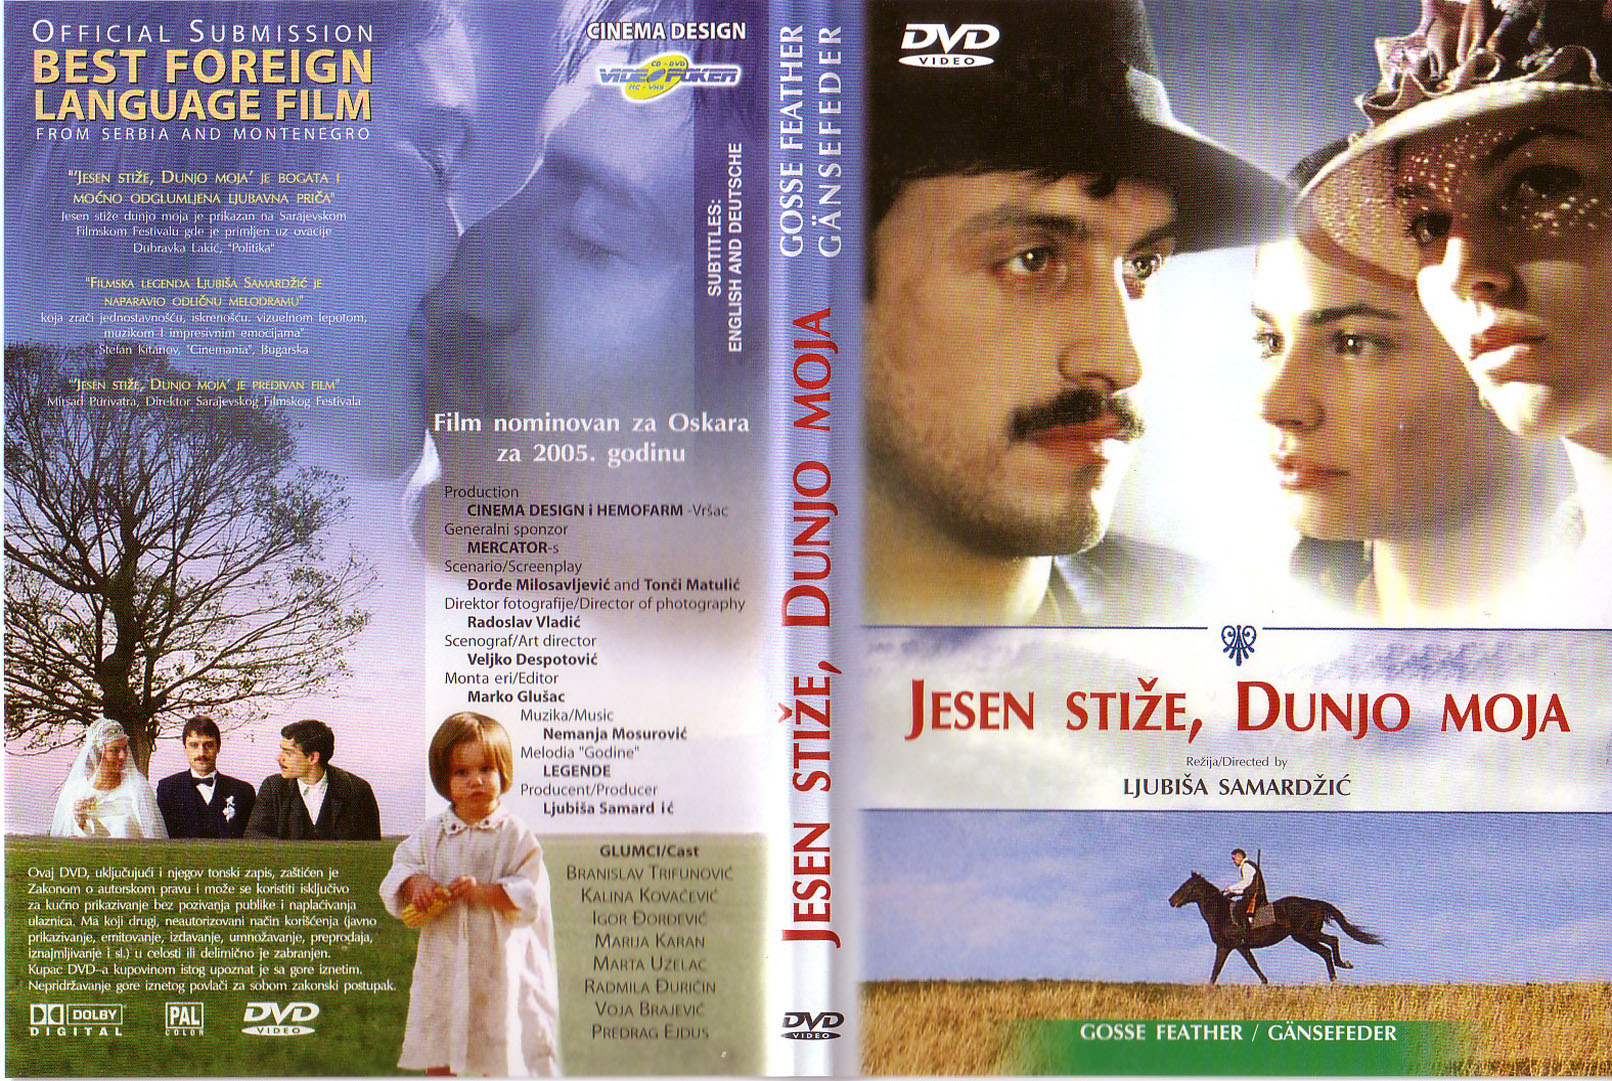 Click to view full size image -  DVD Cover - J - jesen_stize_dunjo_moja_dvd - jesen_stize_dunjo_moja_dvd.jpg